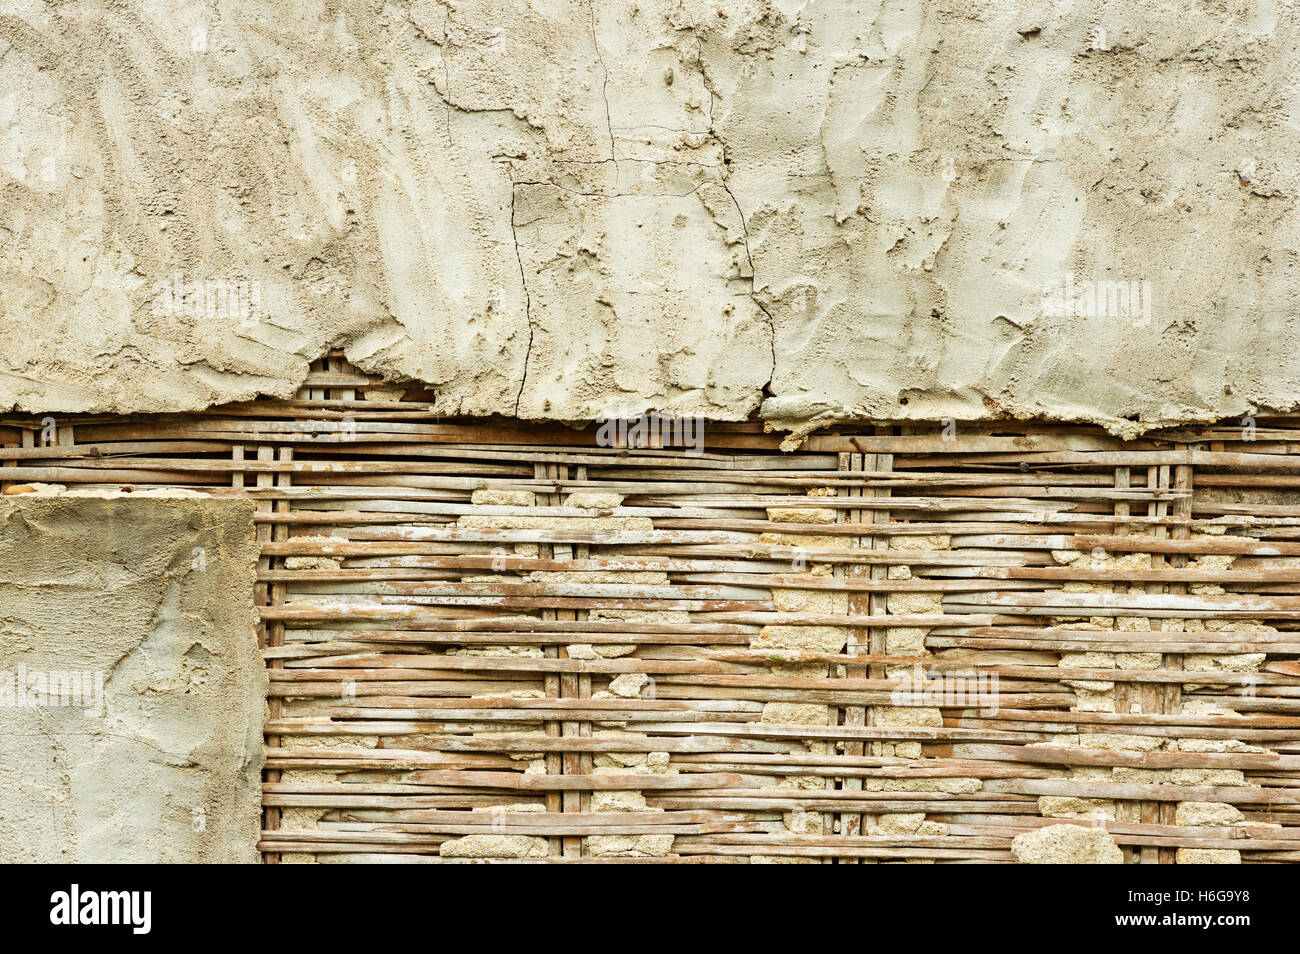 old bamboo lath and plaster wall falling apart Stock Photo